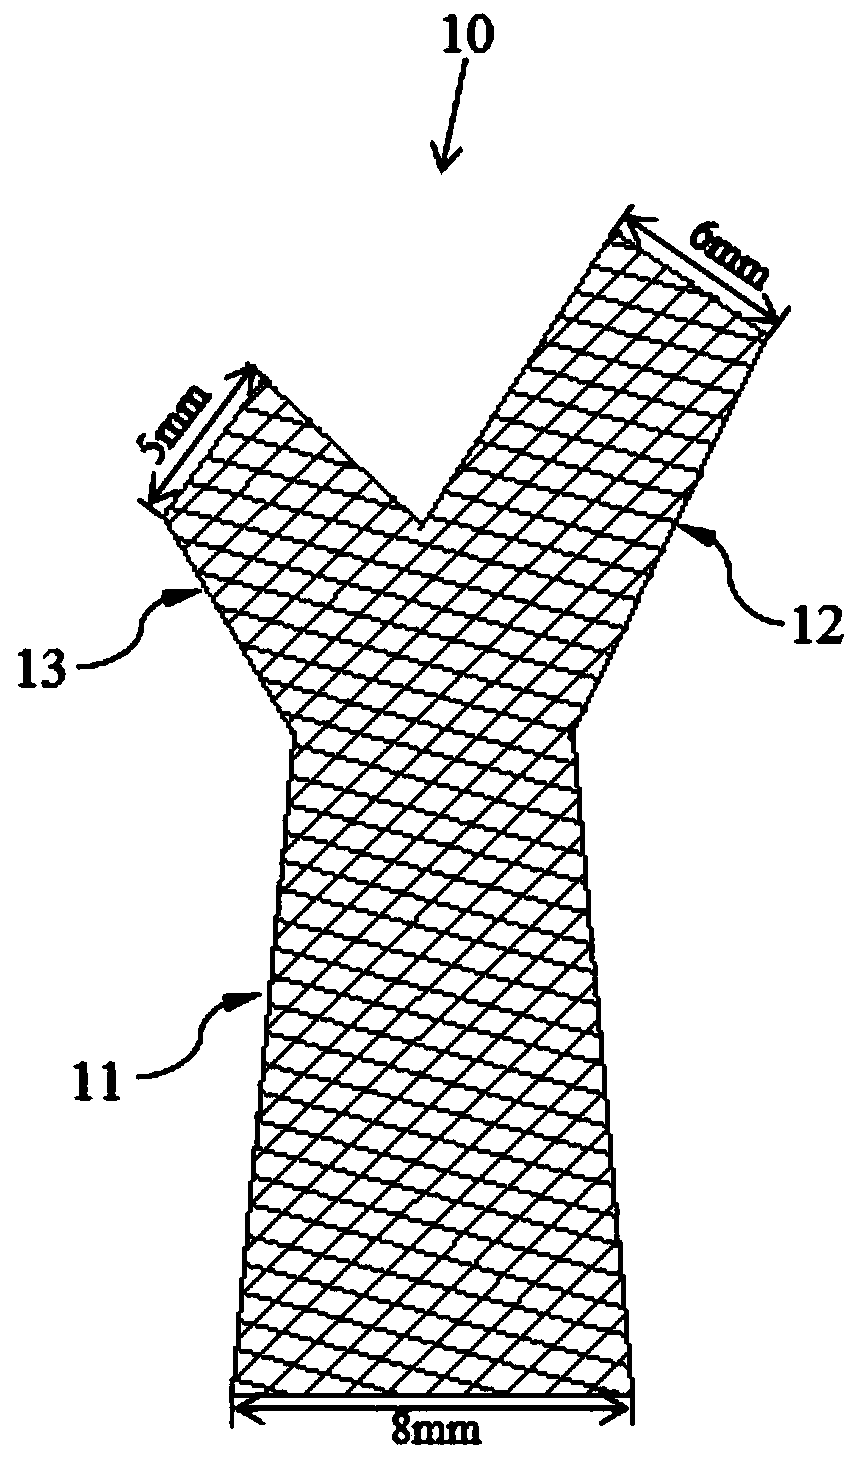 Y-shaped carotid artery stent with absorbable self-protruding membrane branch